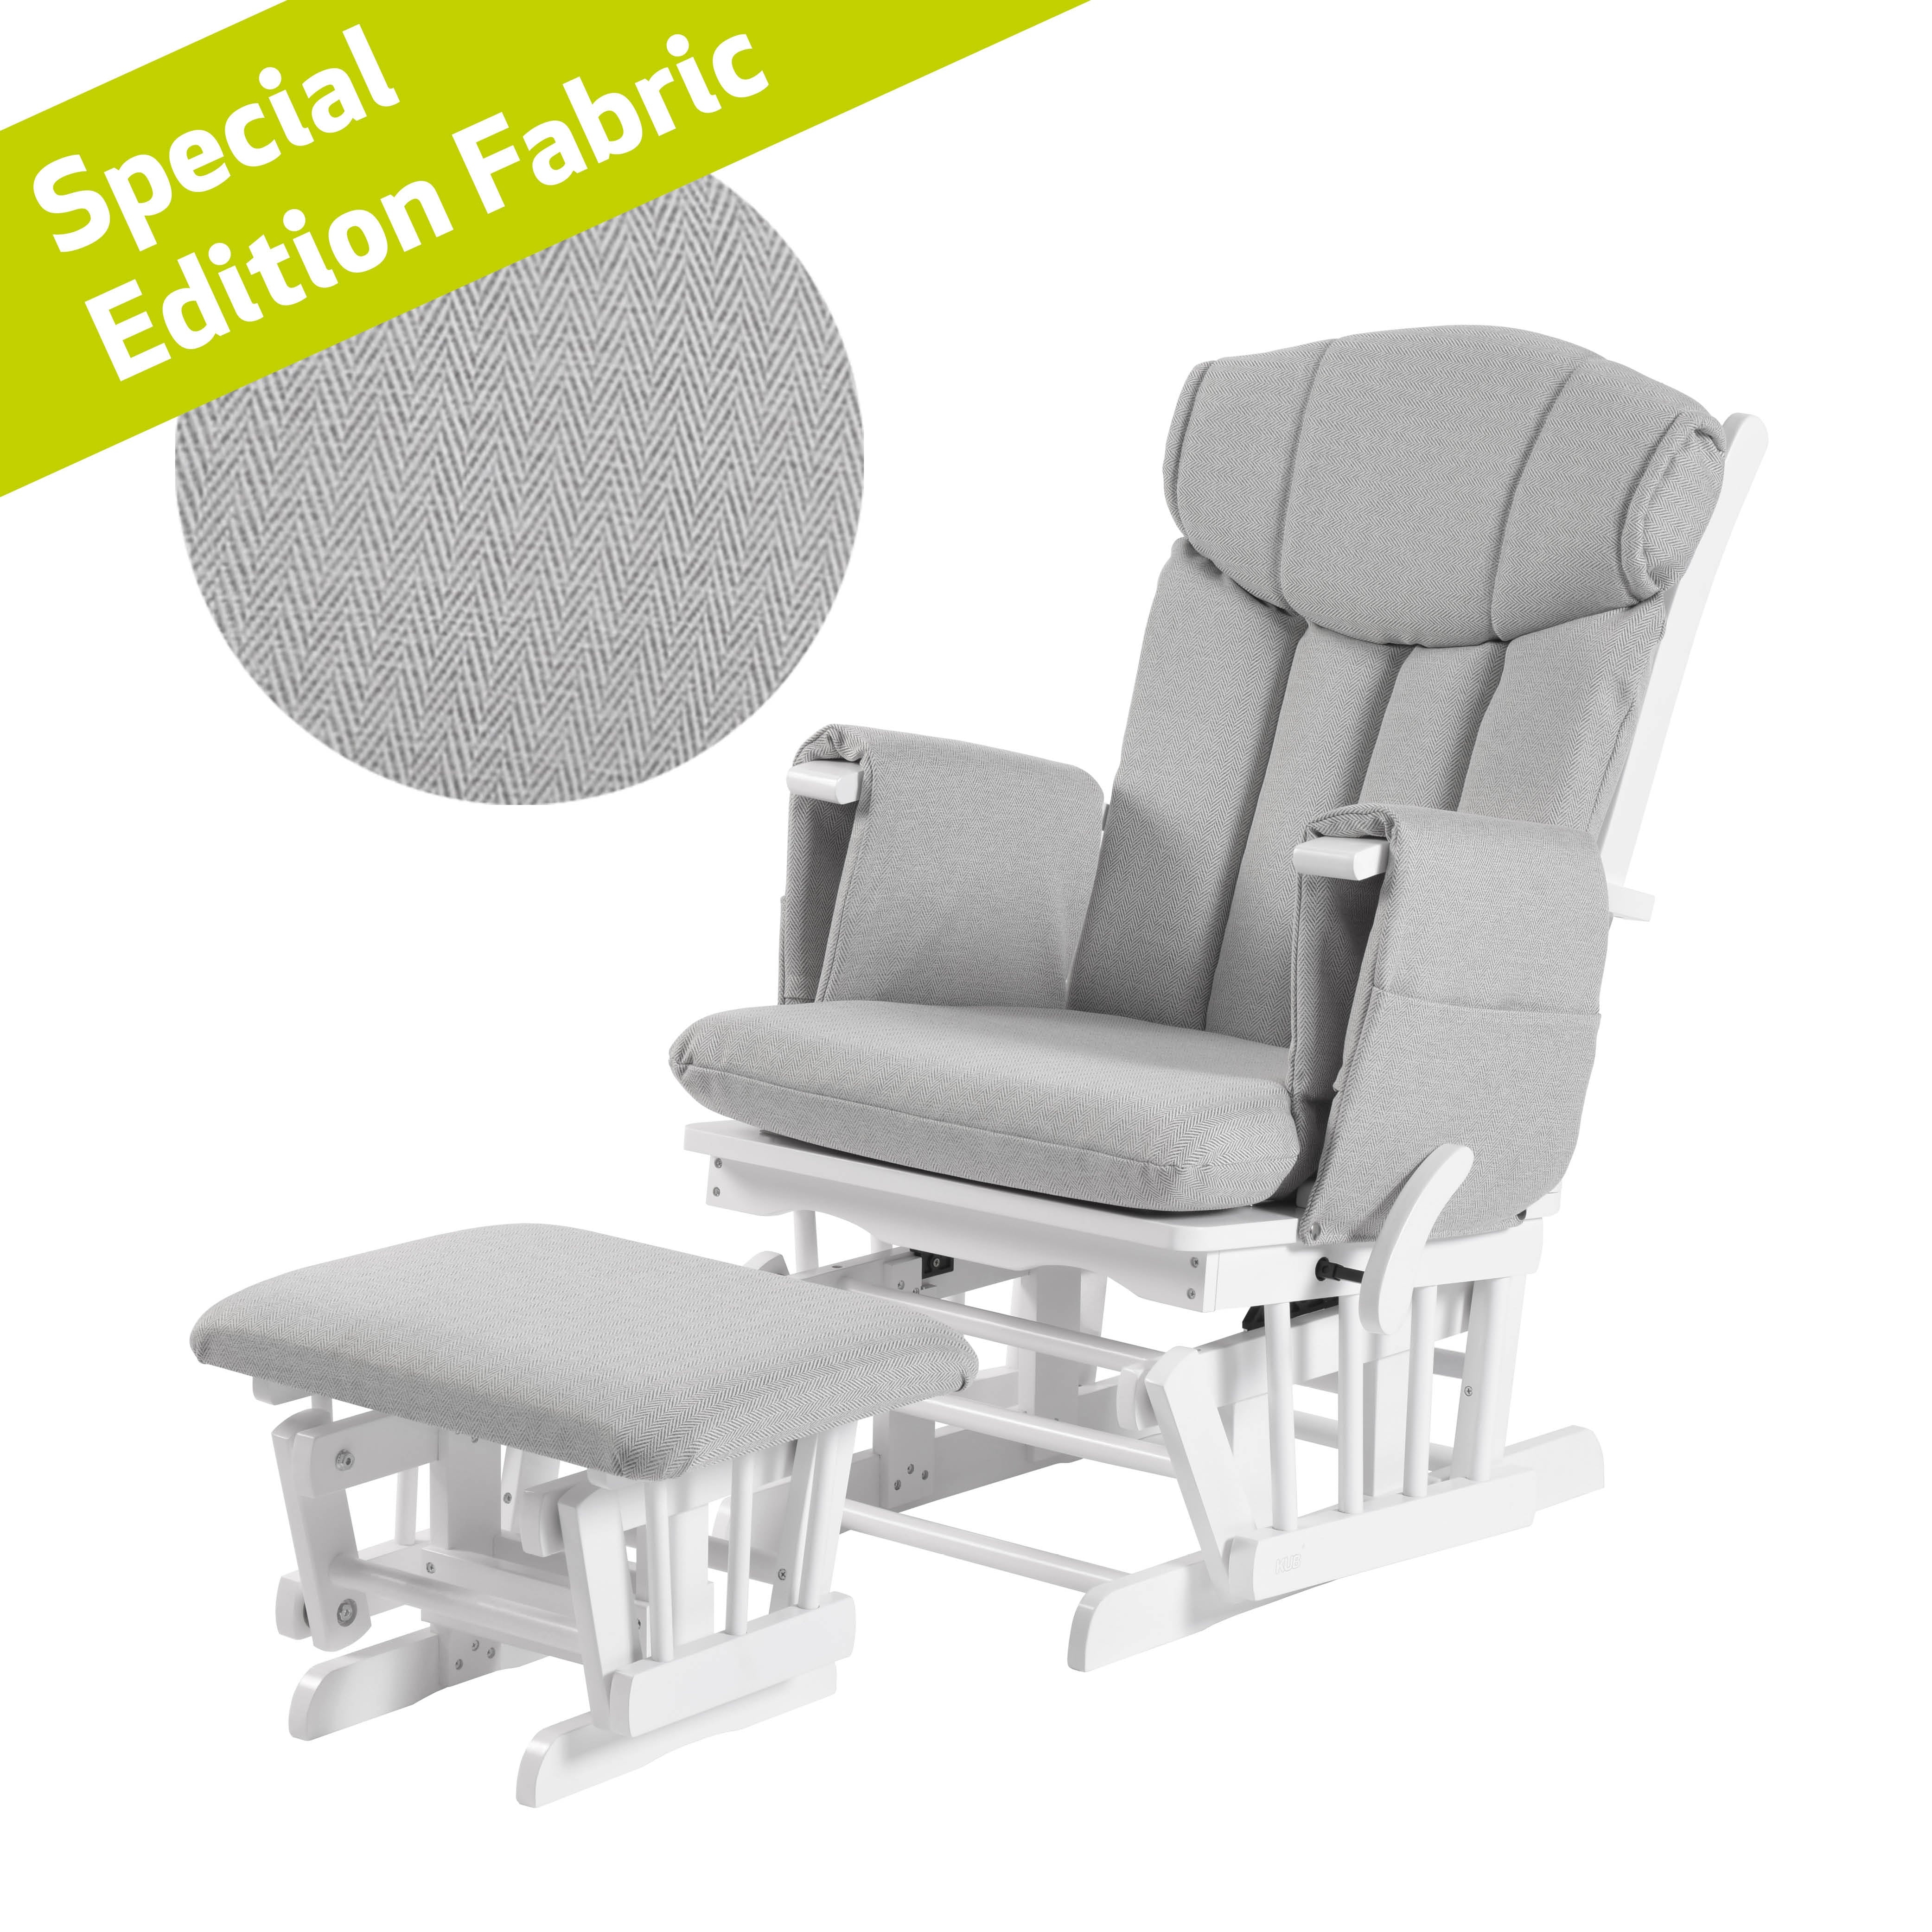 Chatsworth Nursing Chair and Footstool Special Edition